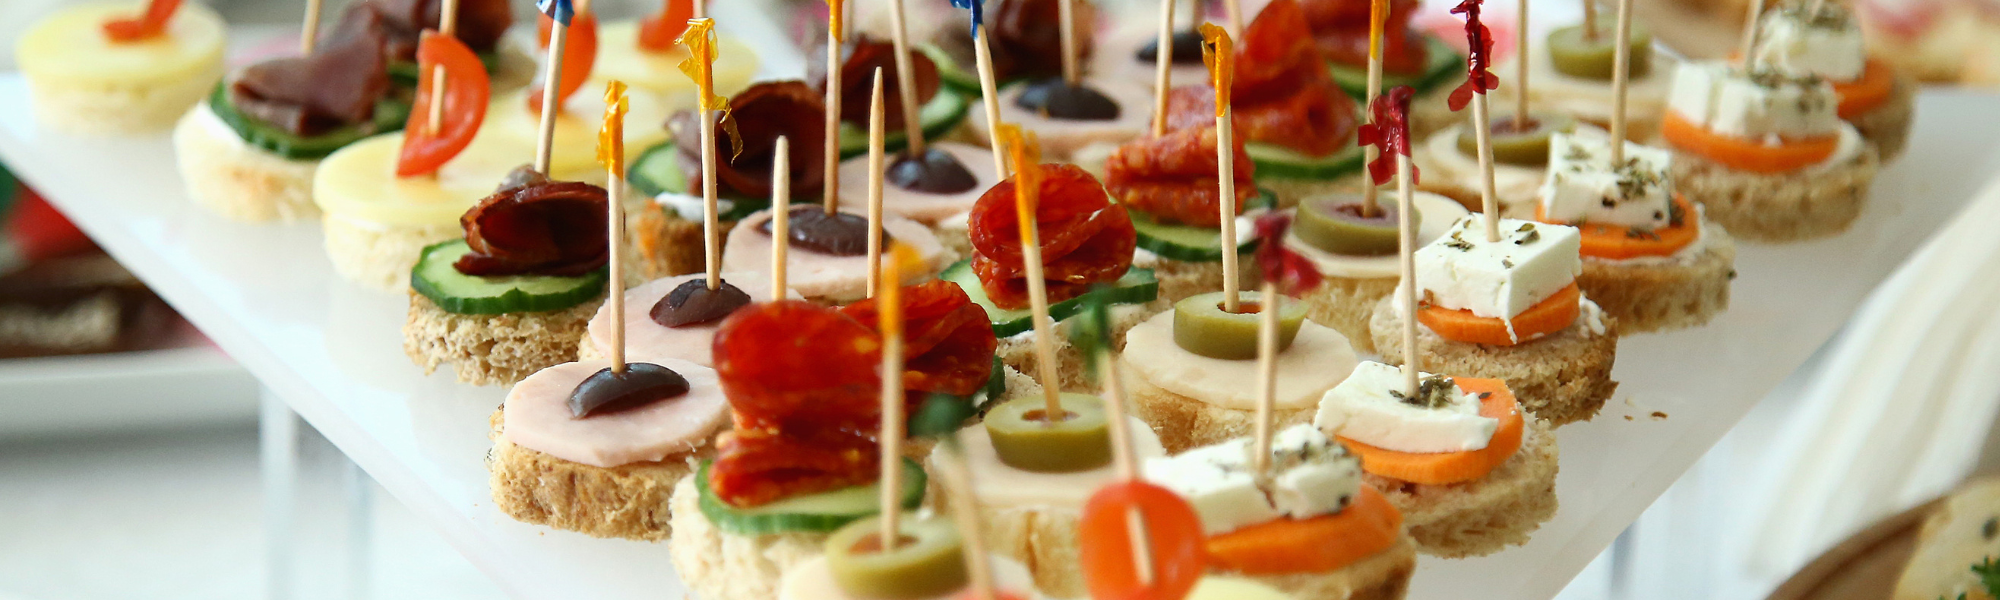 catered appetizers on a tray